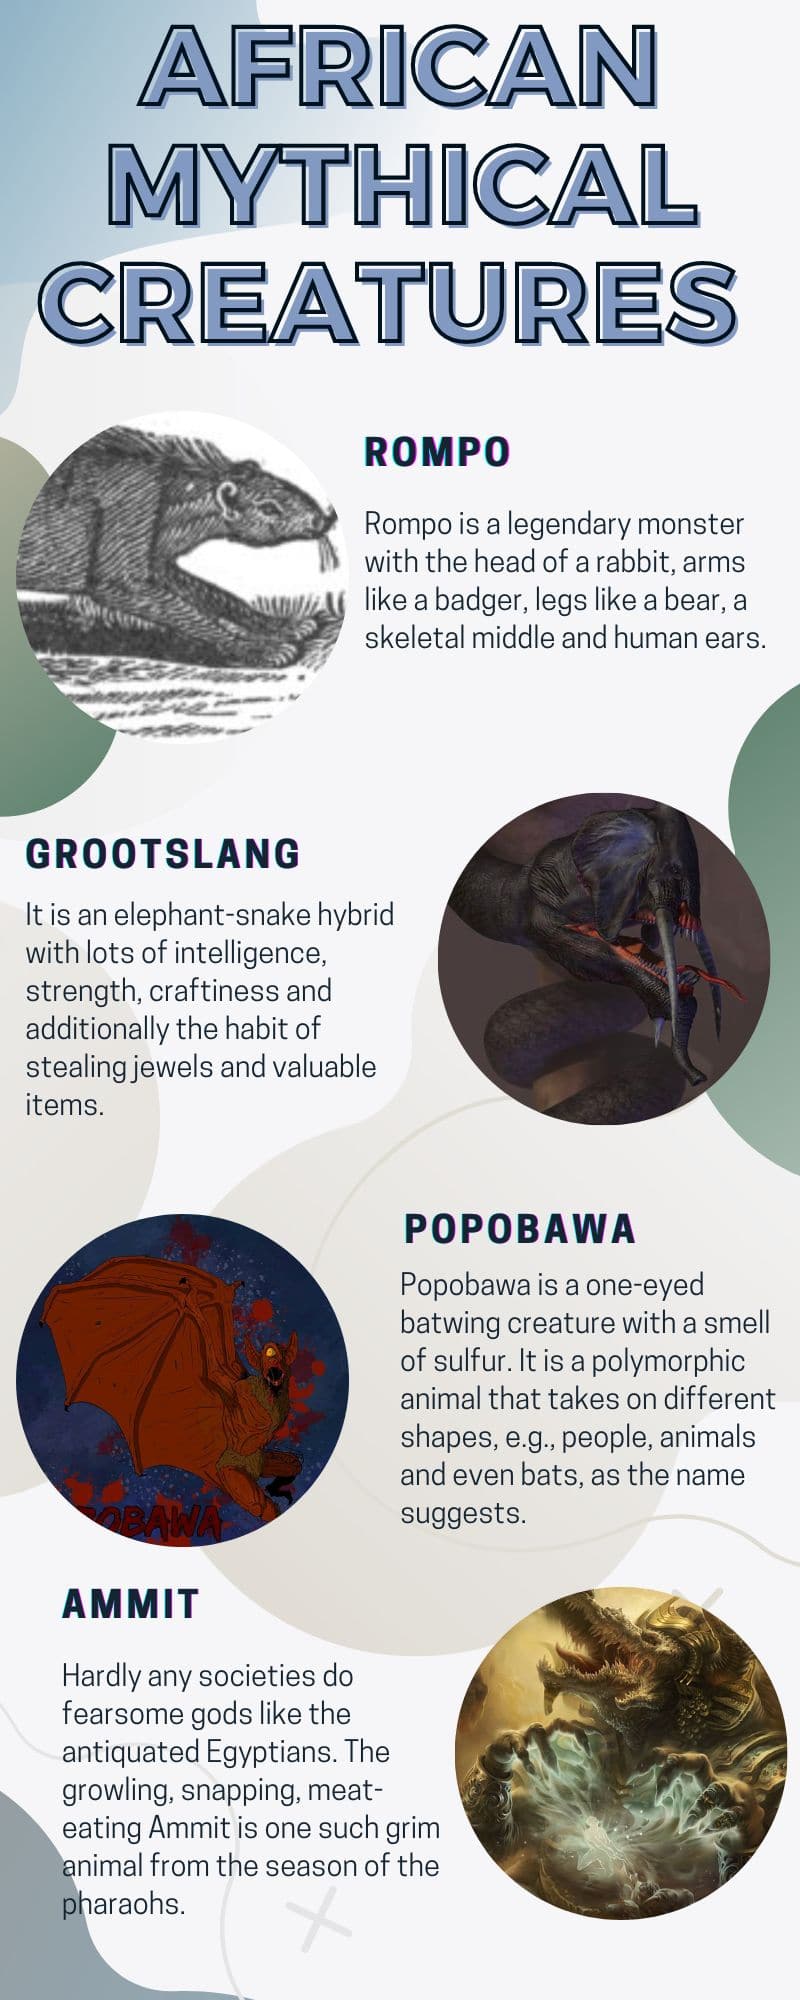 African mythical creatures